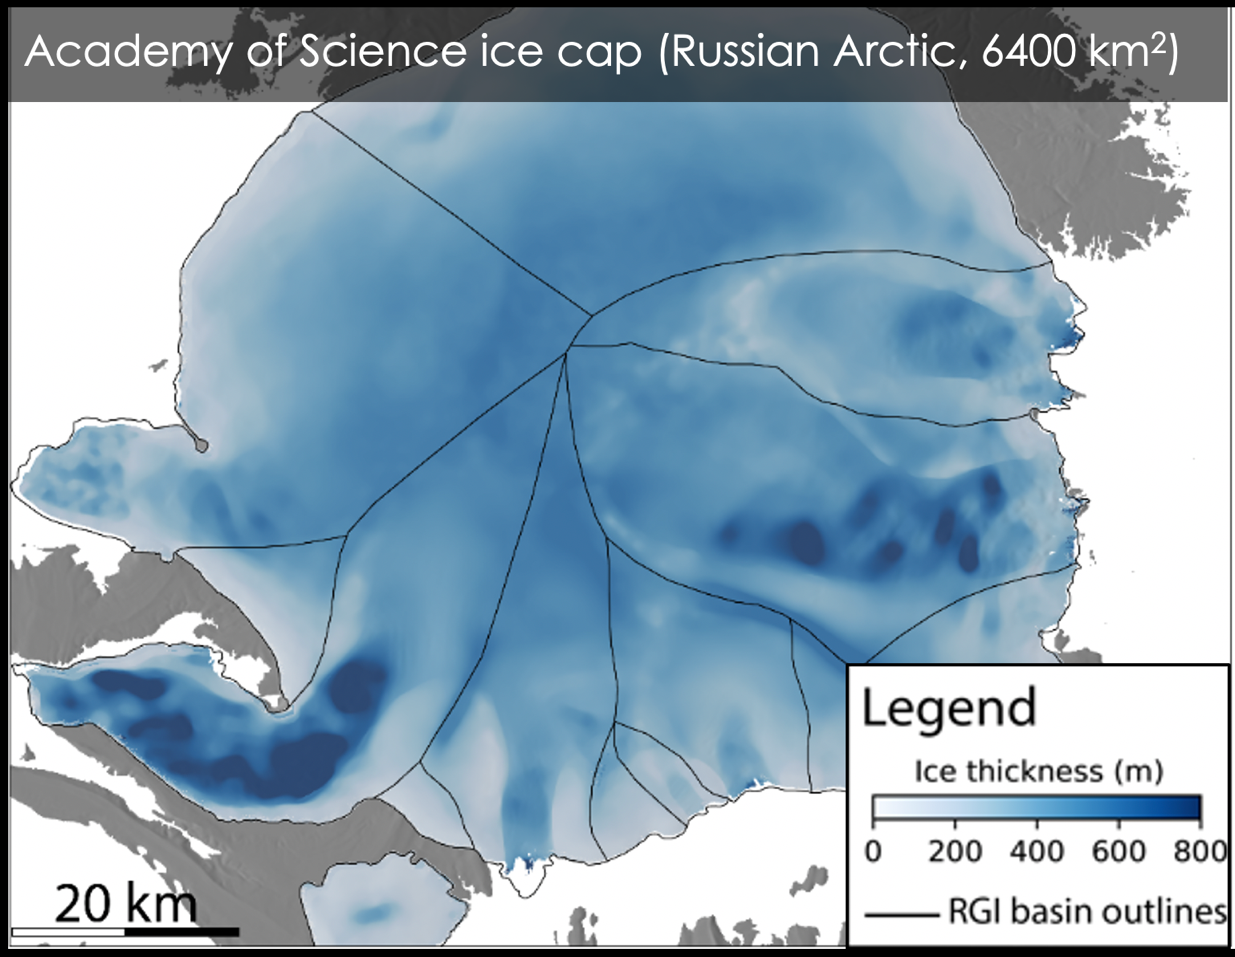 Map of the ice thickness distribution for the Academy of Science ice cap located in the Russian Arctic. Similar data are available for all glacierized regions on Earth.